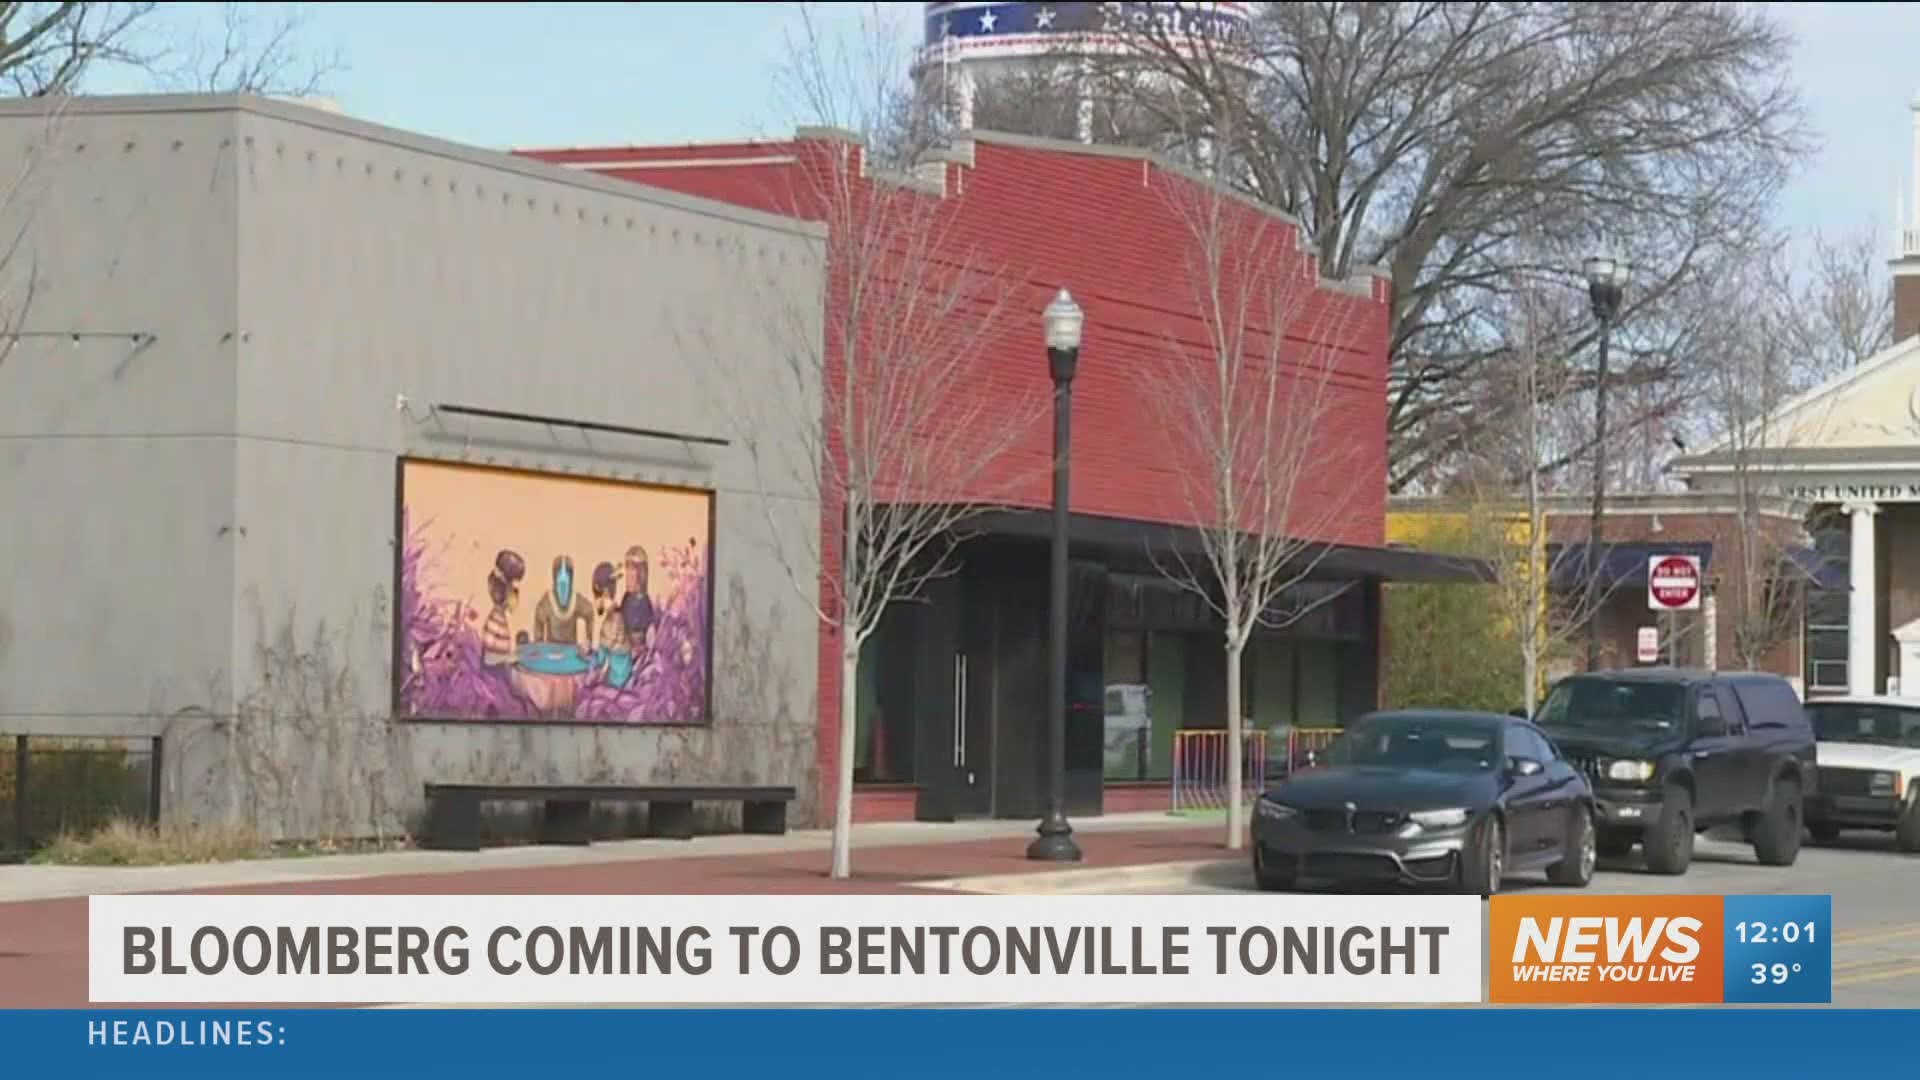 Presidential hopeful Mike Bloomberg will be in Bentonville ahead of Super Tuesday.